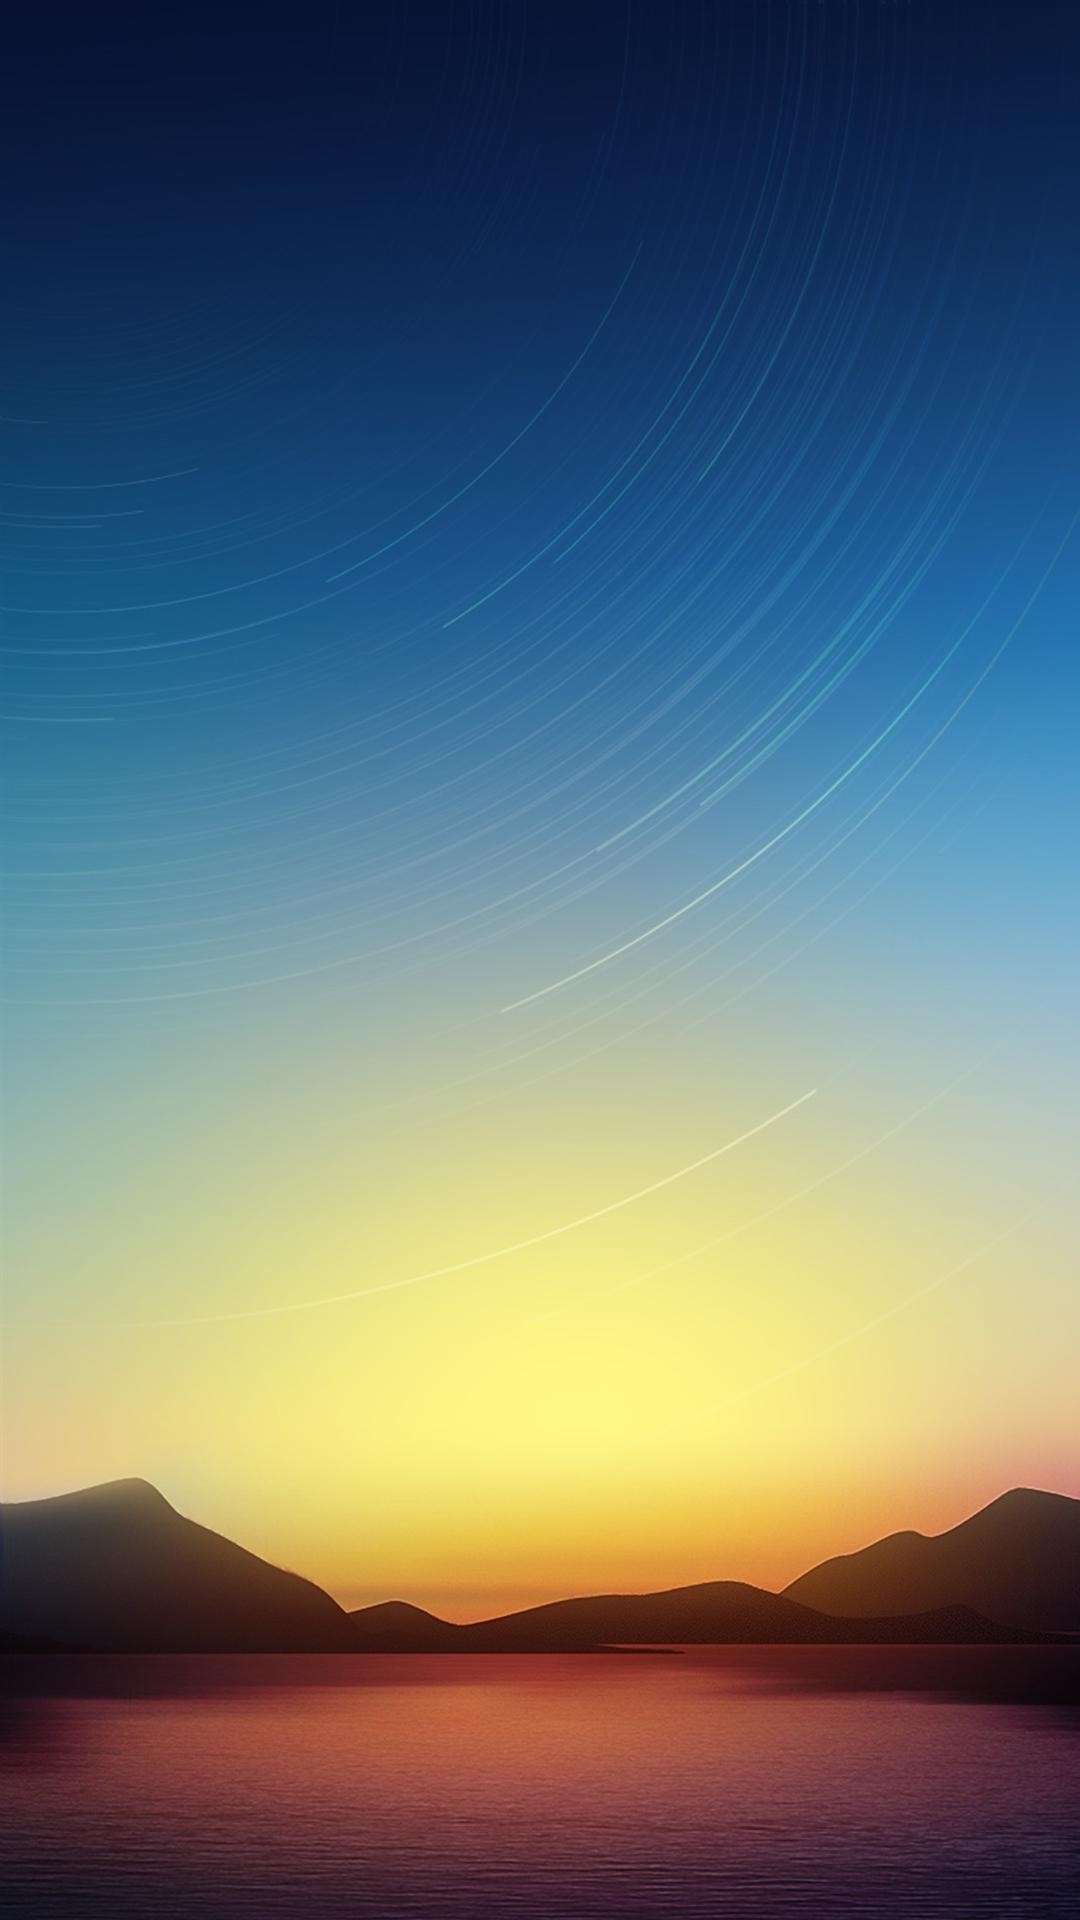 1080x1920 Sunset Galaxy S4 Wallpapers HD 42, HD, Galaxy S4 Wallpapers, S4 .